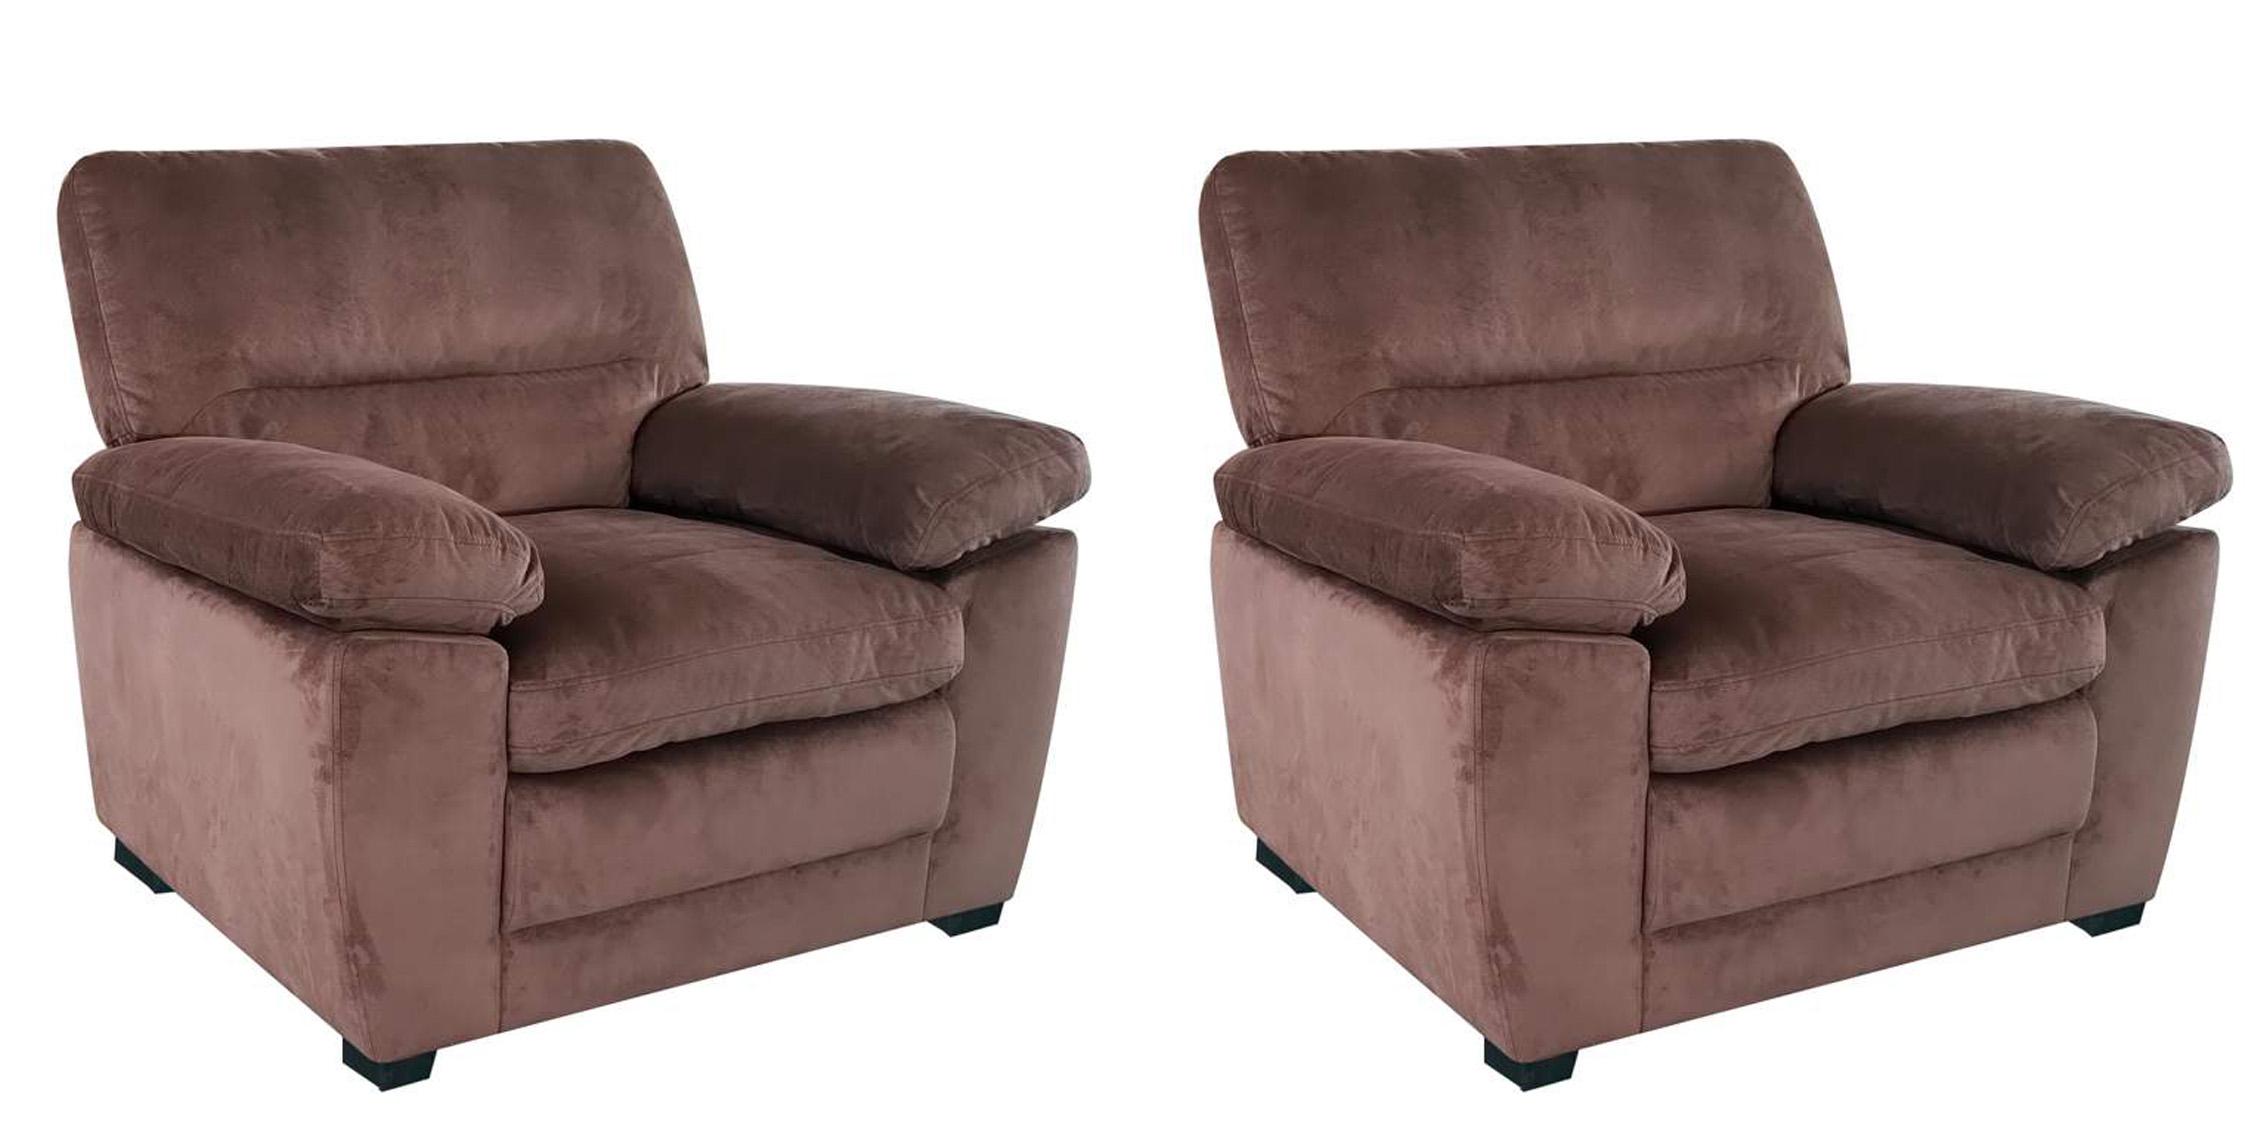 Contemporary, Modern Arm Chair Set MAXX GHF-808857523242-Set-2 in Brown Fabric